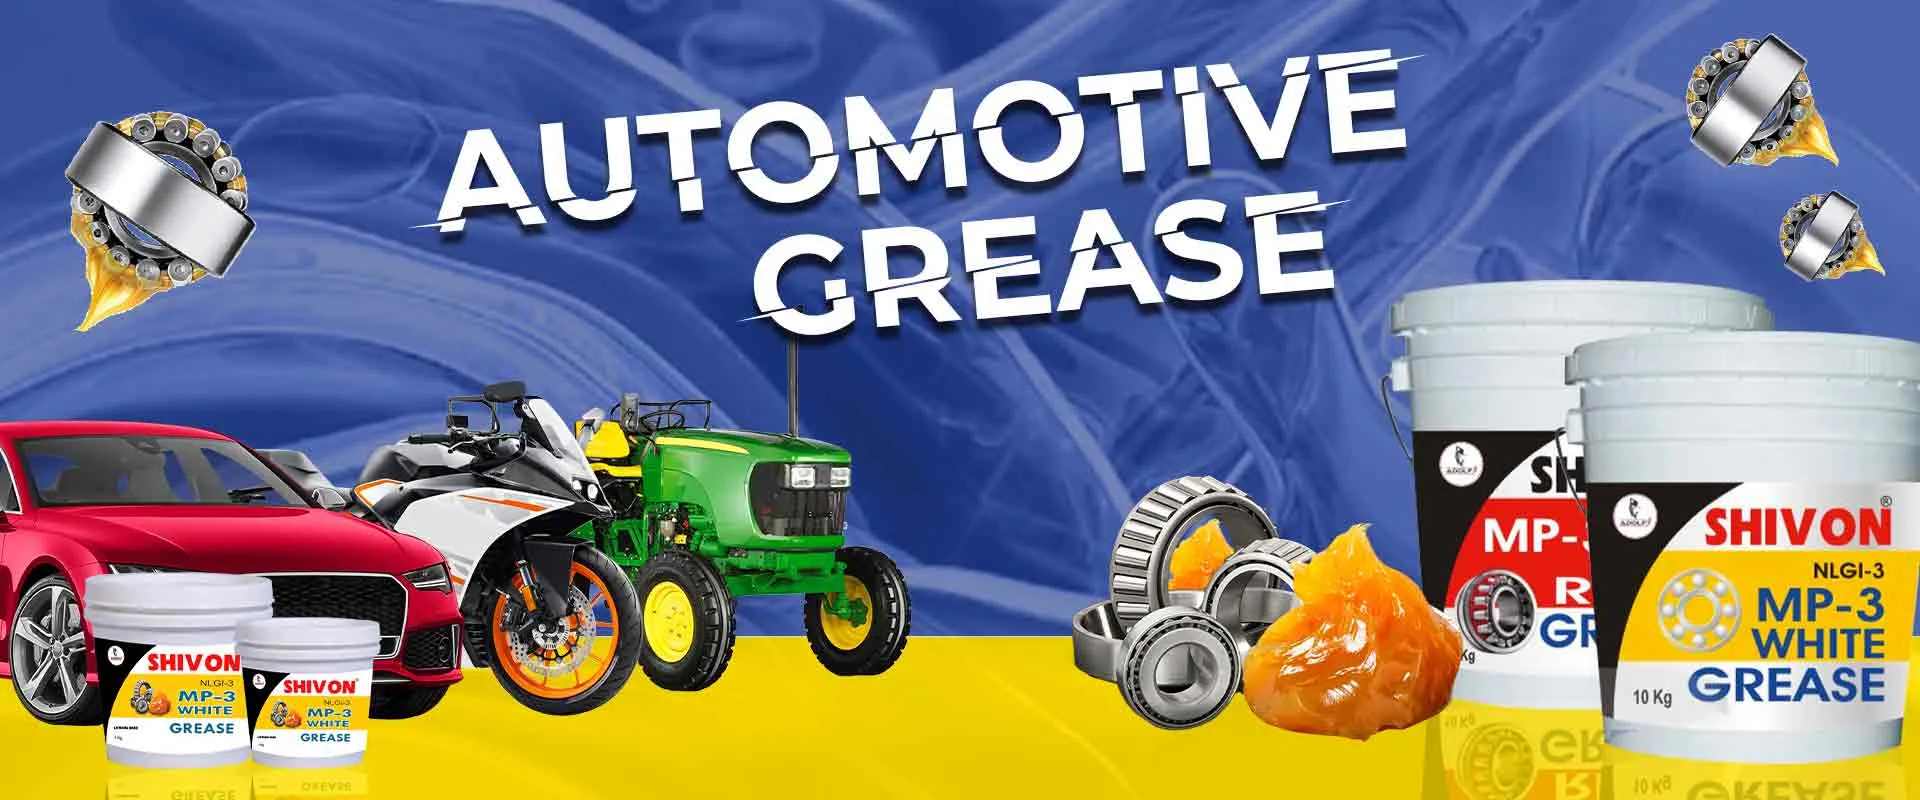 Automotive Grease In Imphal East